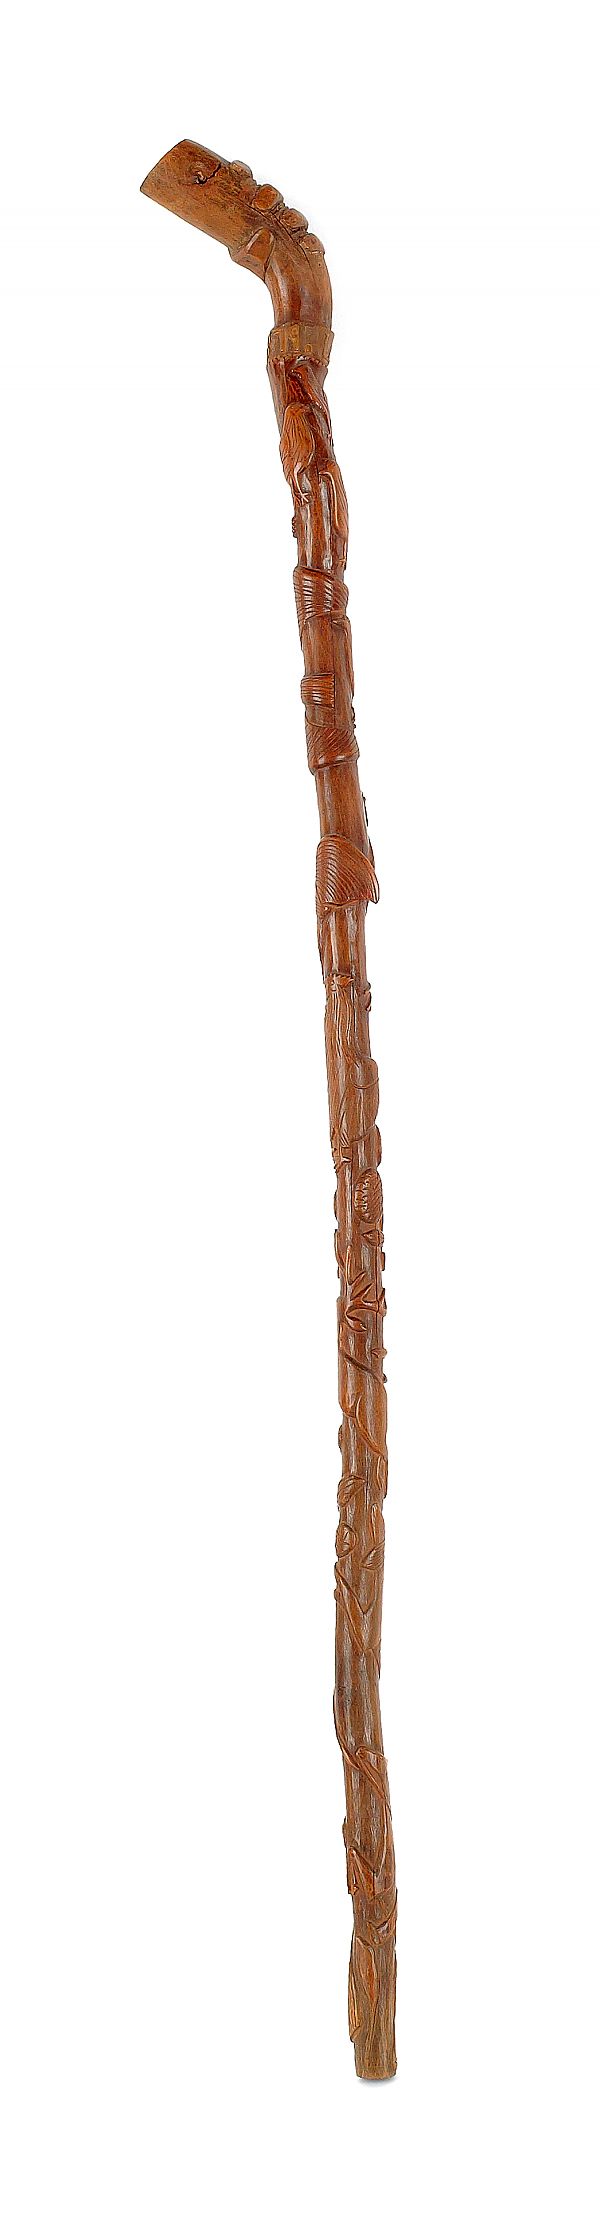 Pennsylvania carved cane dated 17583a